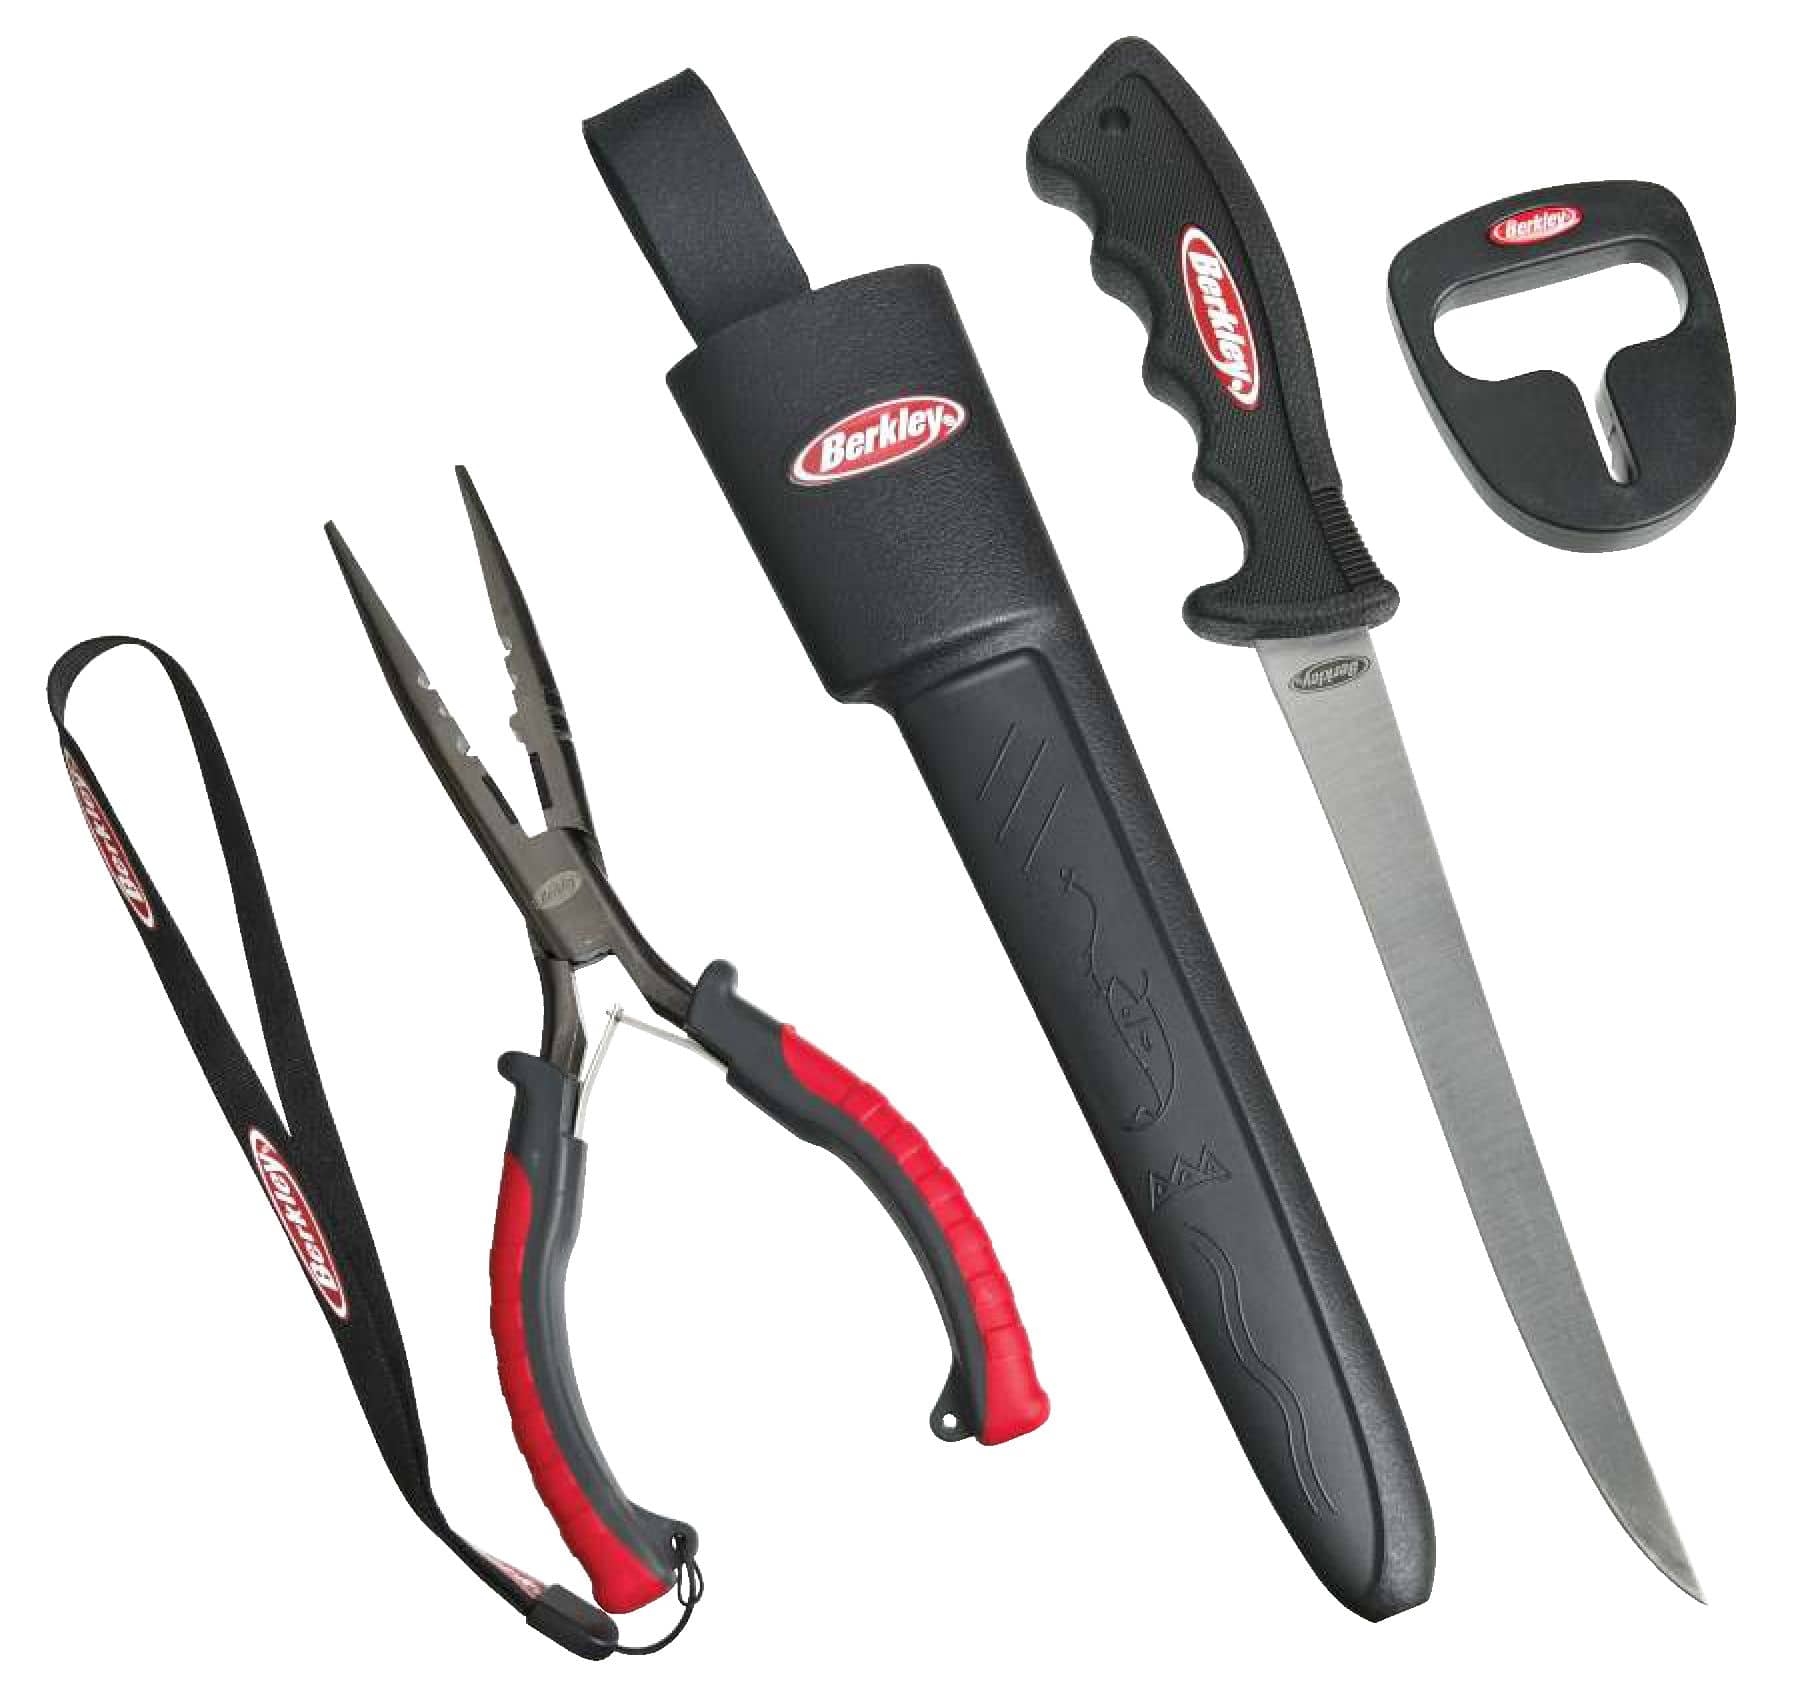 Berkley Deluxe Electric 12 Volt Fillet Knife Combo with Case #1318417, NEW!